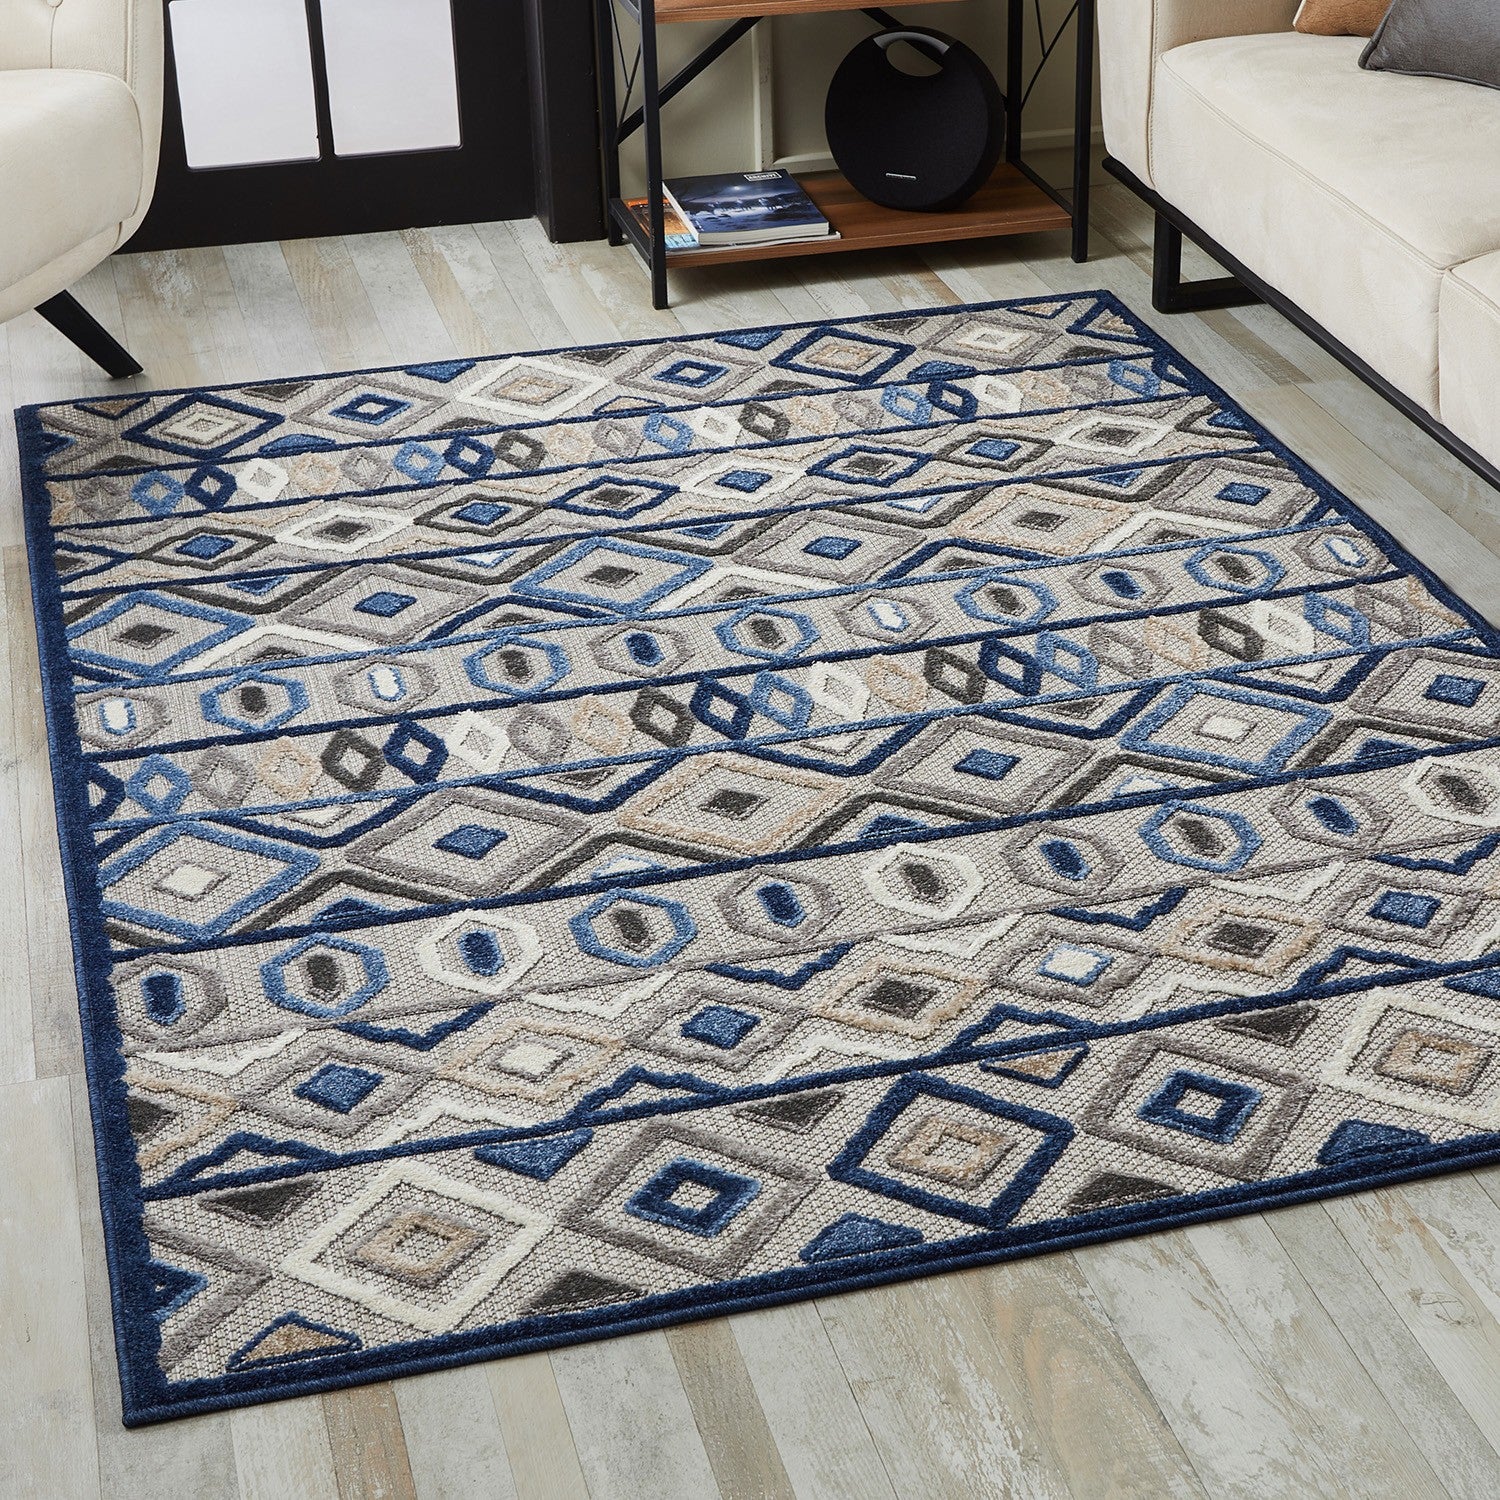 7' X 9' Blue And Gray Abstract Stain Resistant Indoor Outdoor Area Rug